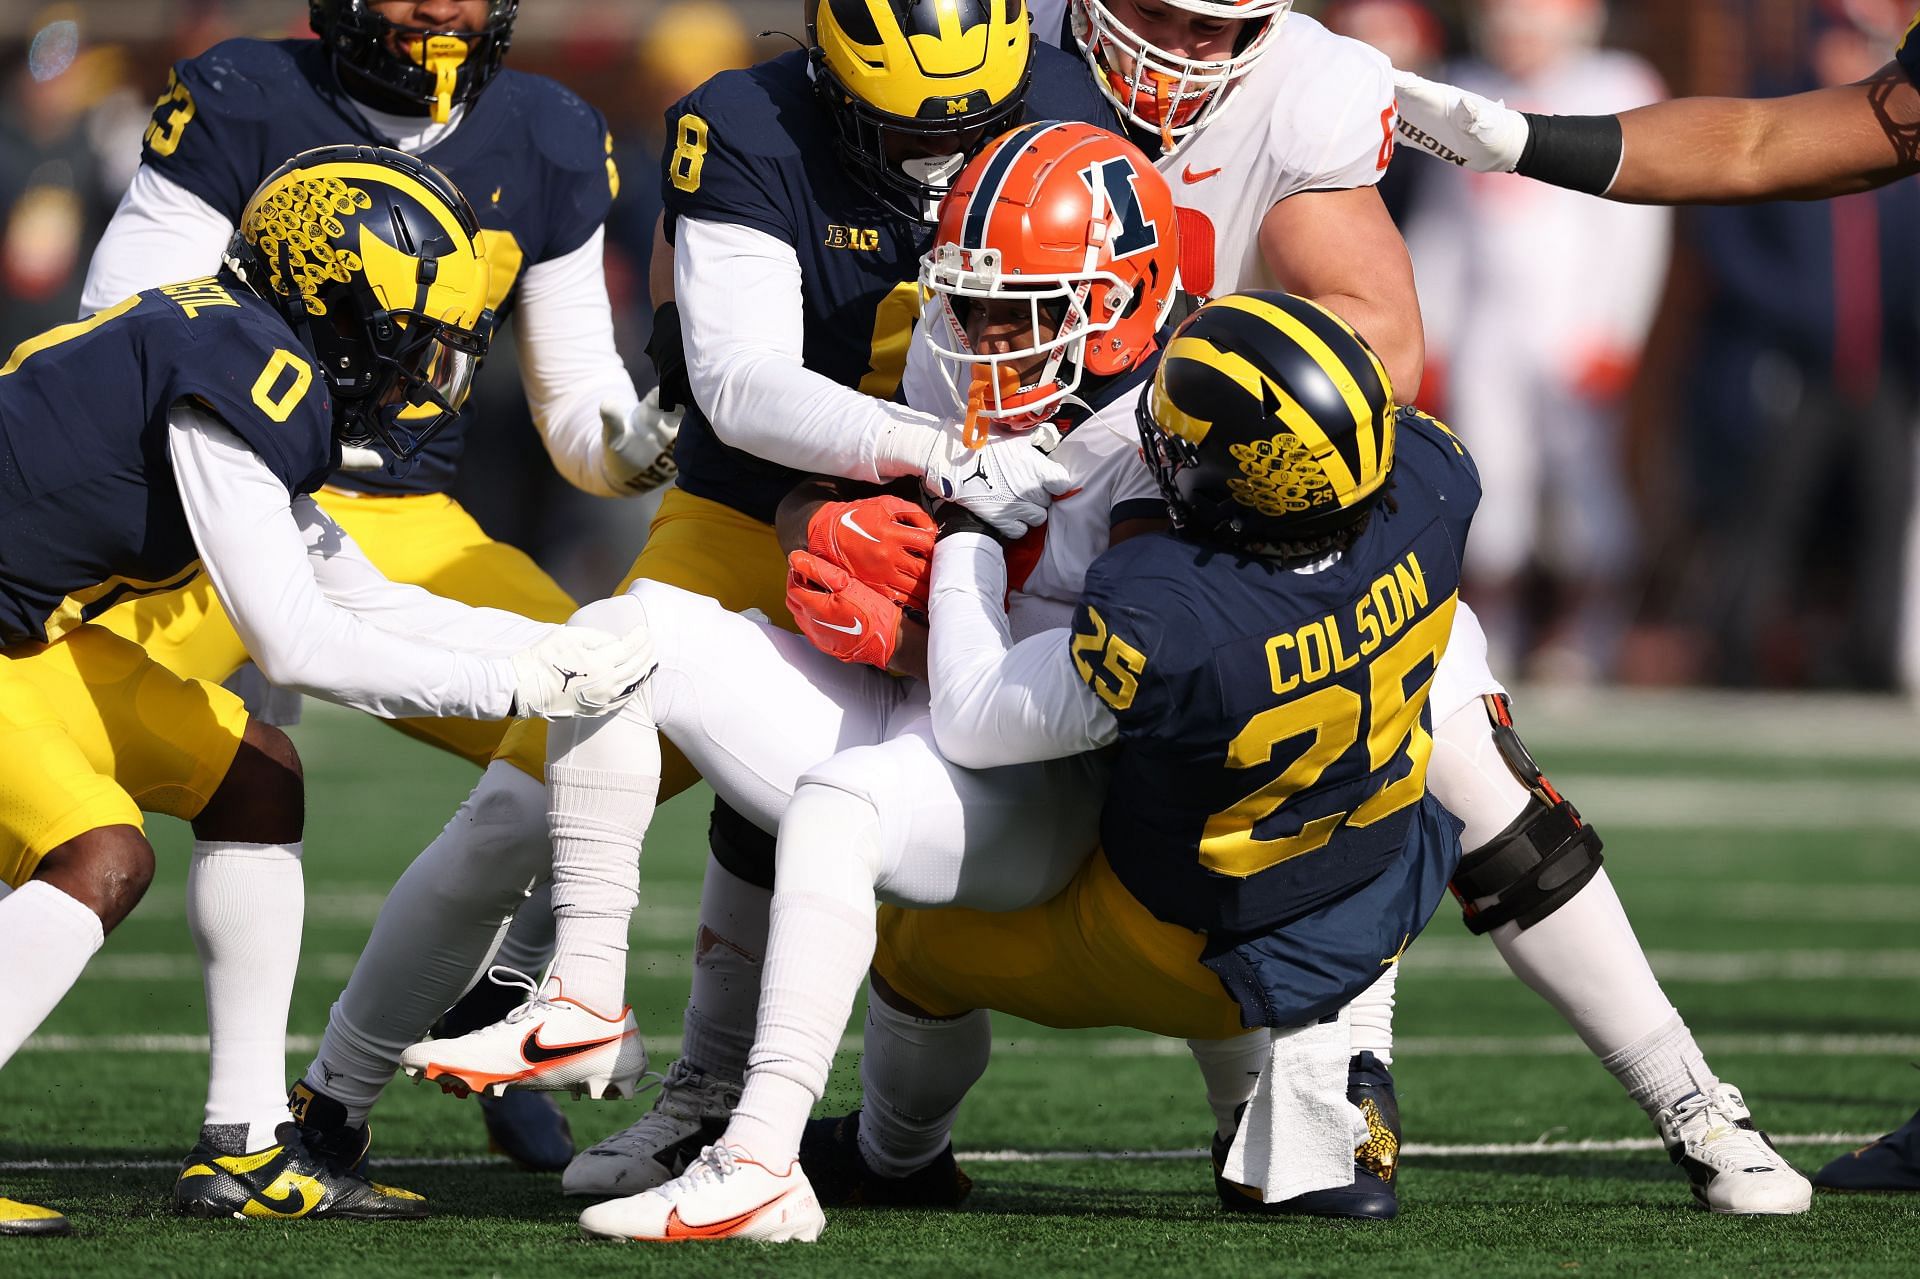 Isaiah Williams #1 of the Illinois Fighting Illini is tackled by Junior Colson #25 and Derrick Moore #8 of the Michigan Wolverines